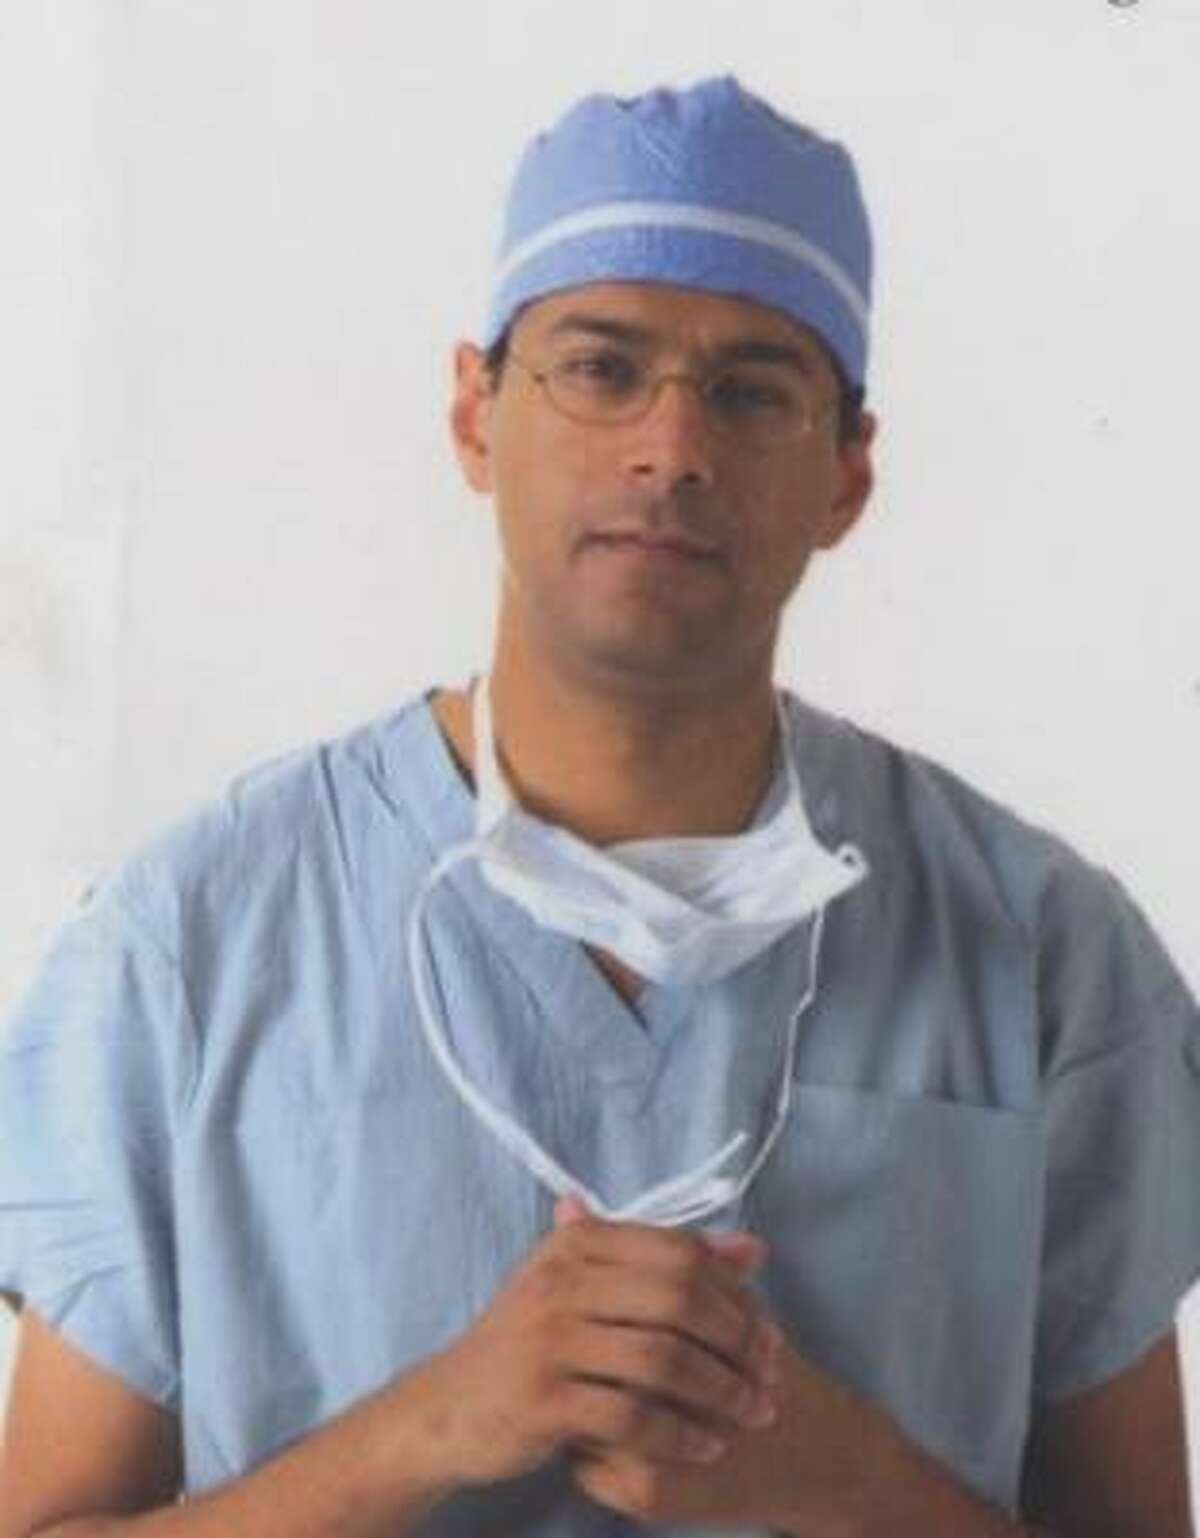 Dr. Atul Gawande calls for diligence and more competition.